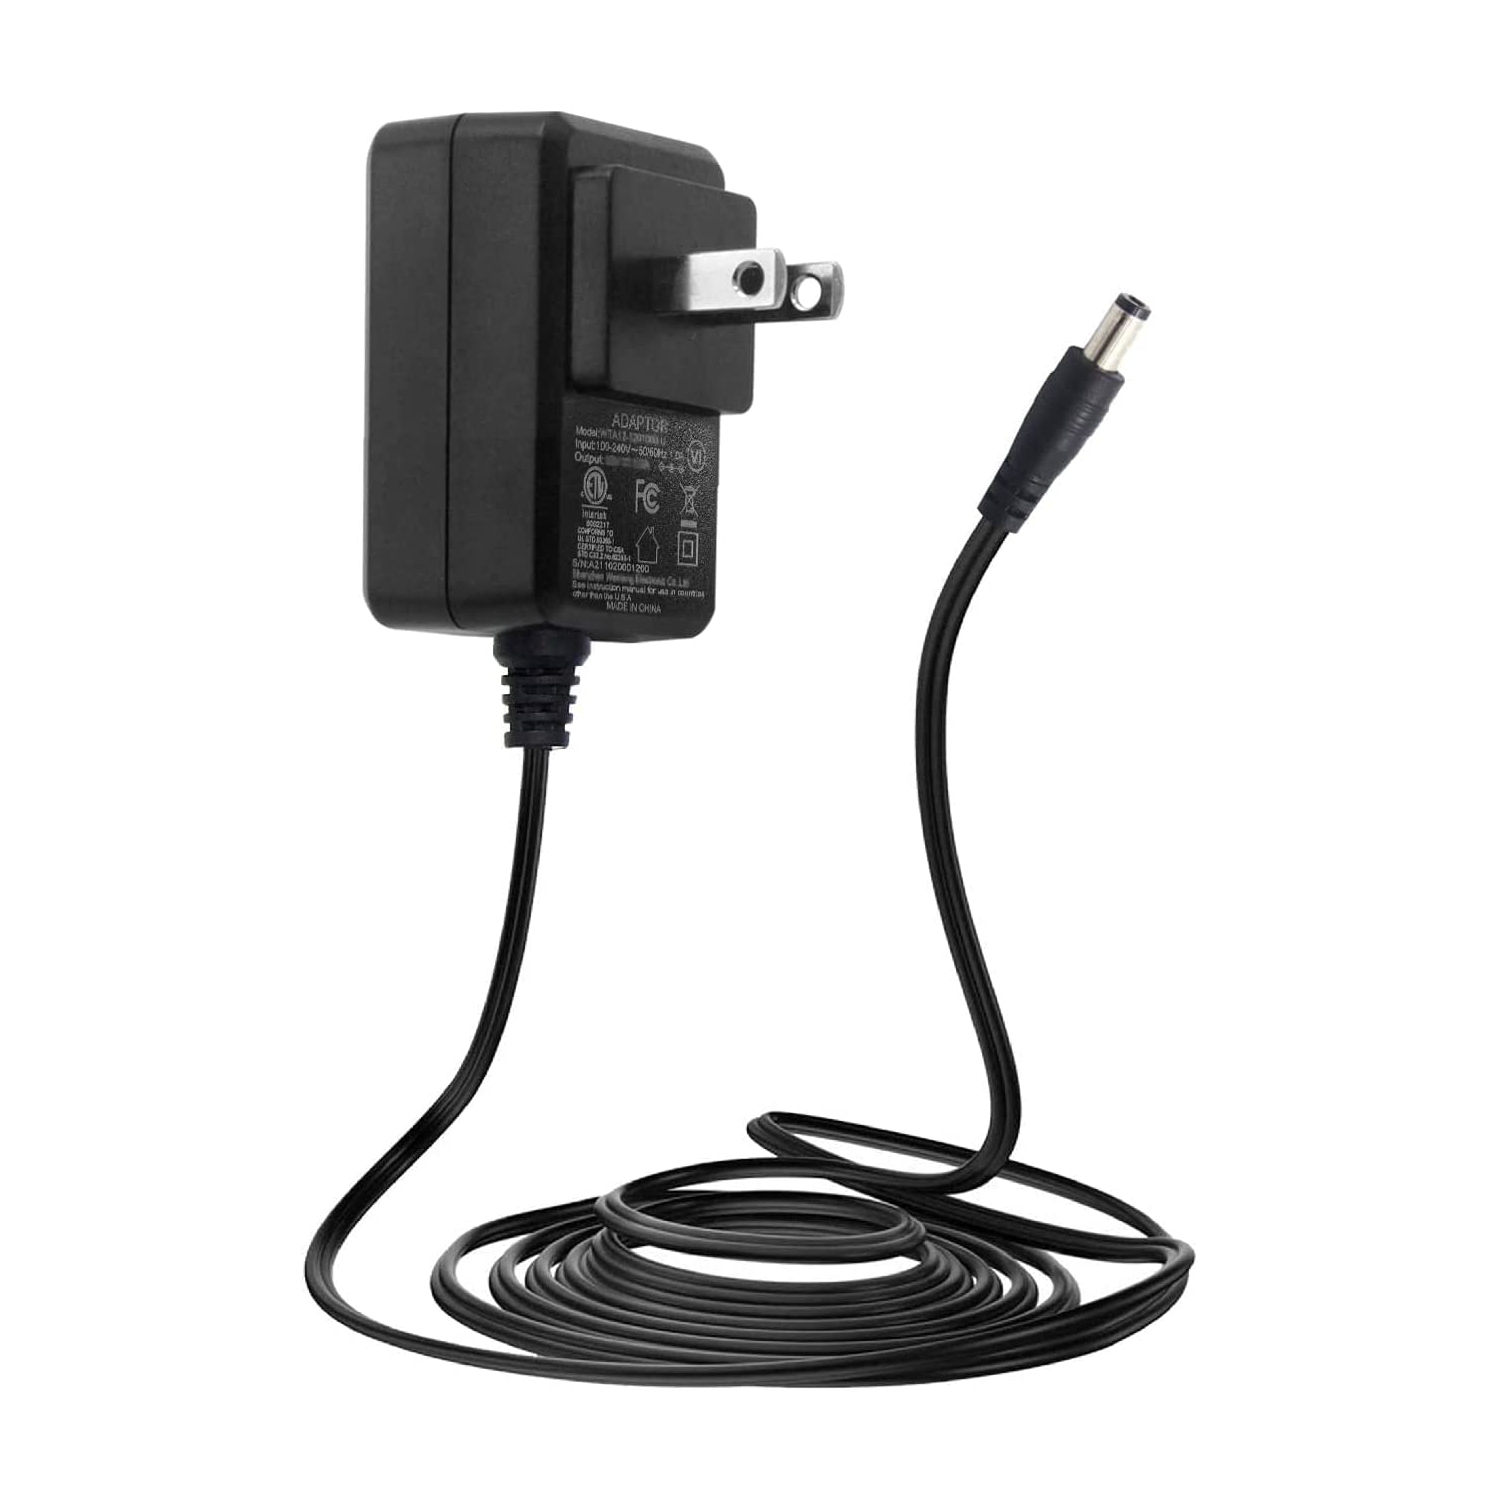 New Universal 5V 2A/2000mA DC Power Supply Adapter, 100~240V AC 50/60Hz to 5V DC 2A 10W Power Adapter Wall